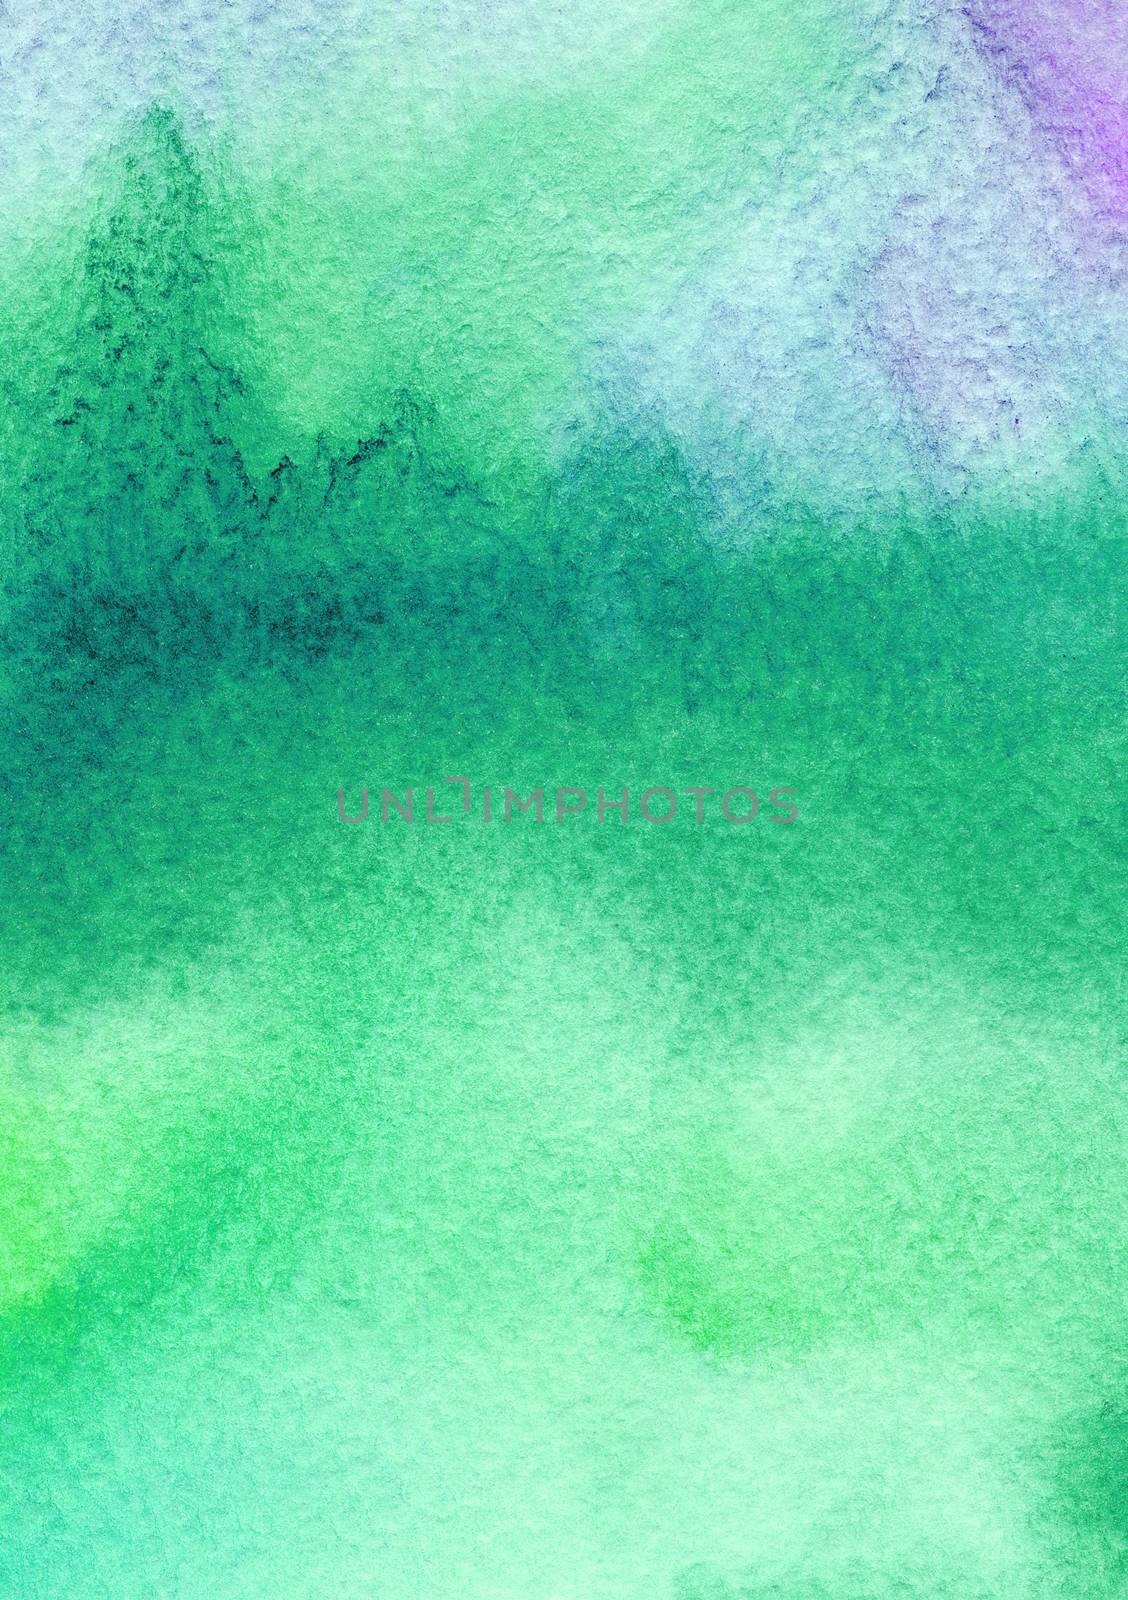 Blue and green watercolors on textured paper background. Grunge pattern. .Raster illustration colorful paint brush with space for text, for media advertising website fashion concept design, banner by LanaLeta